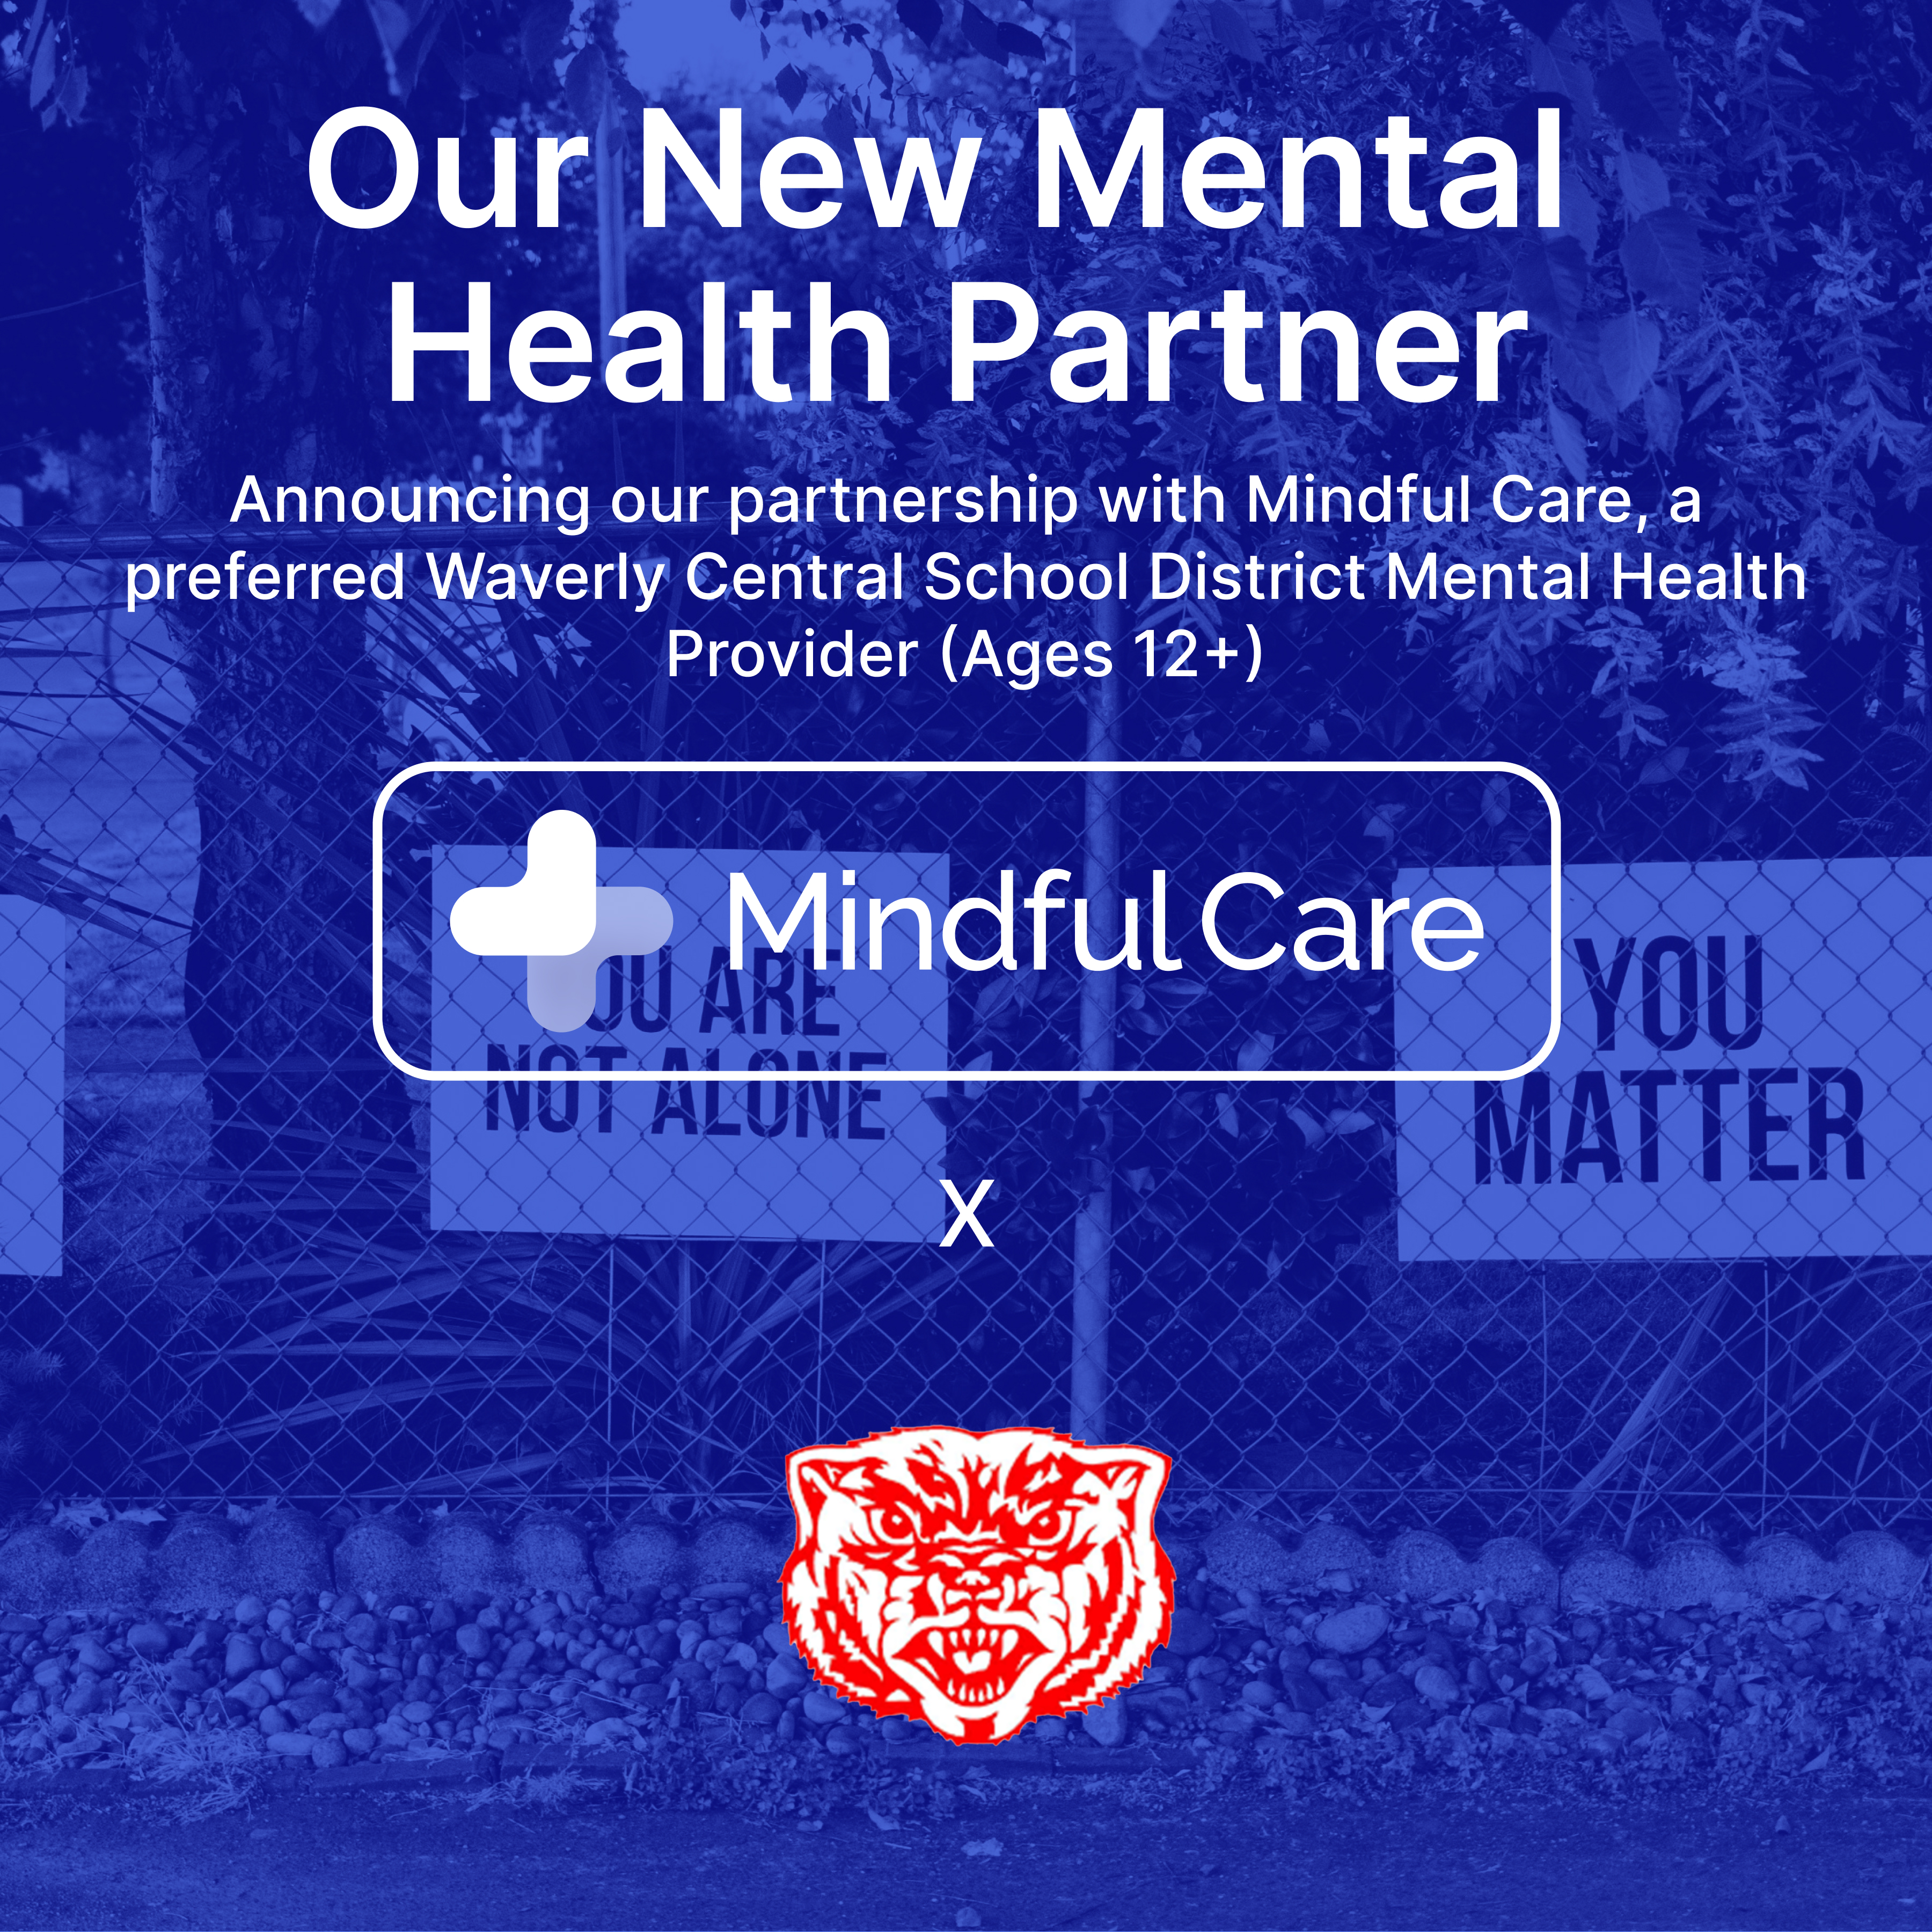 Our New Mental Health Partner Announcing our partnership with Mindful Care, a preferred Waverly Central School District Mental Health Provider (Ages 12+) Mindful Care